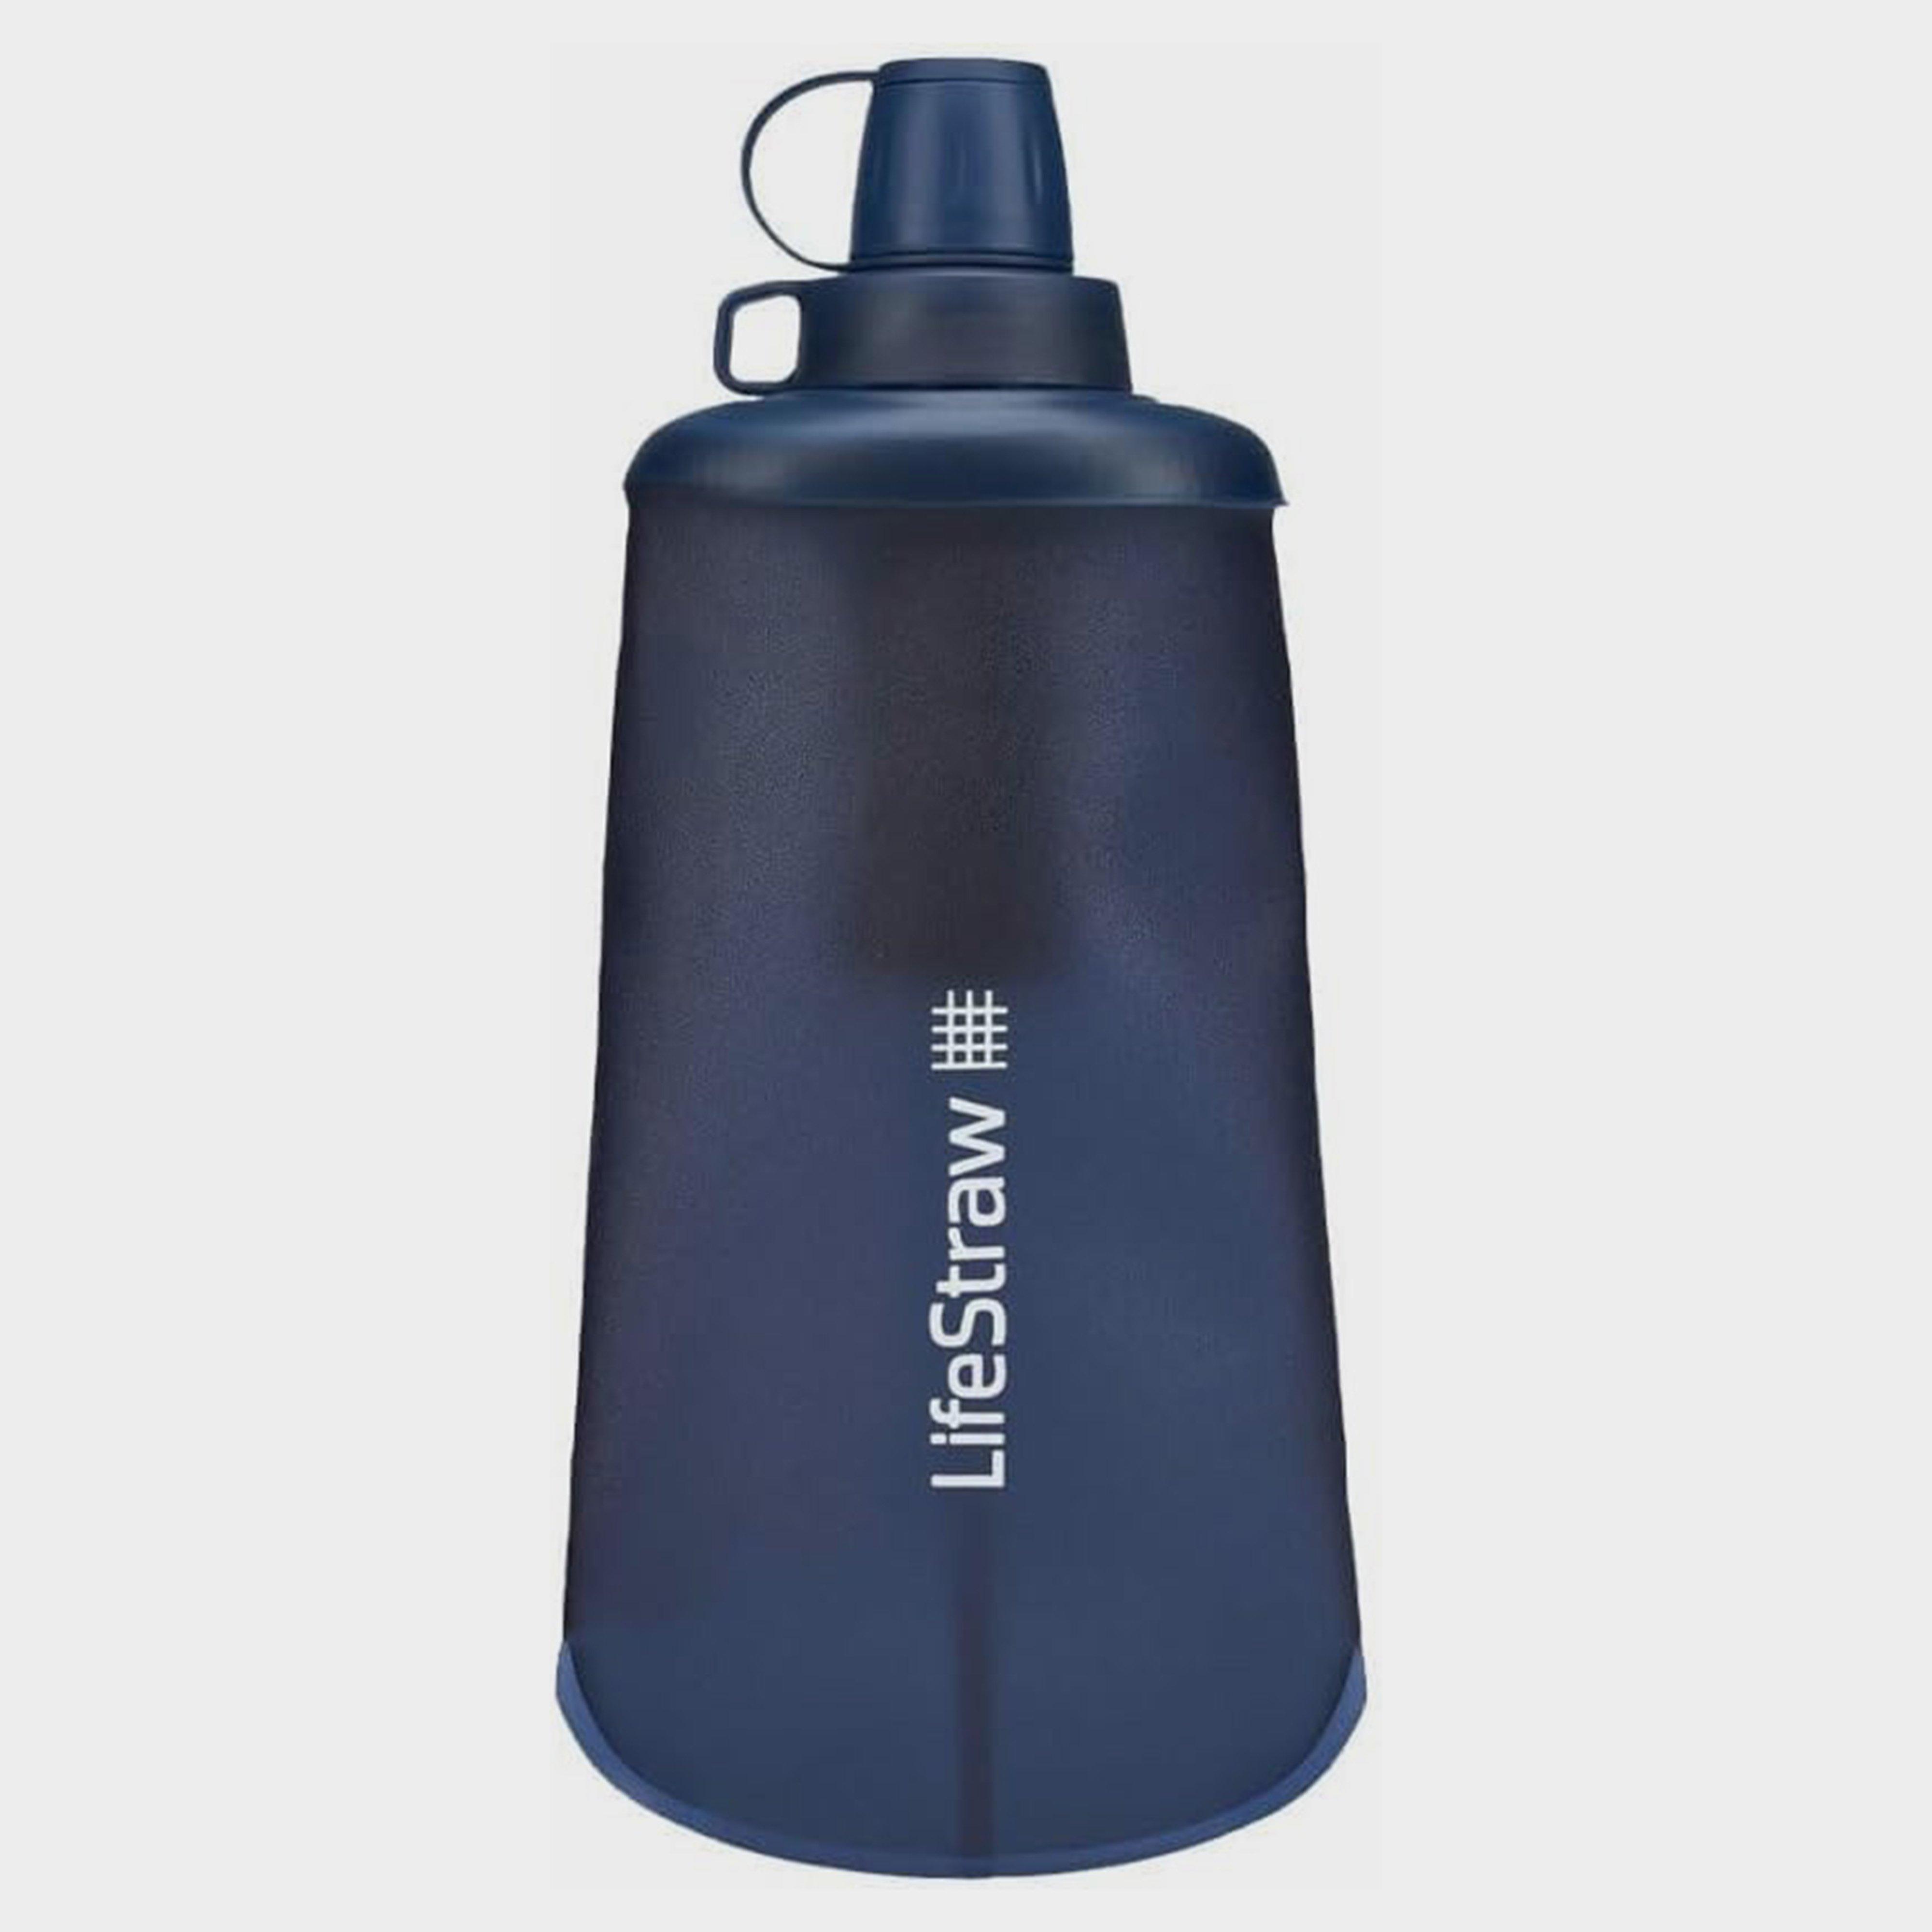  Lifestraw Peak Series Collapsible Squeeze Bottle with Filter - 650ml